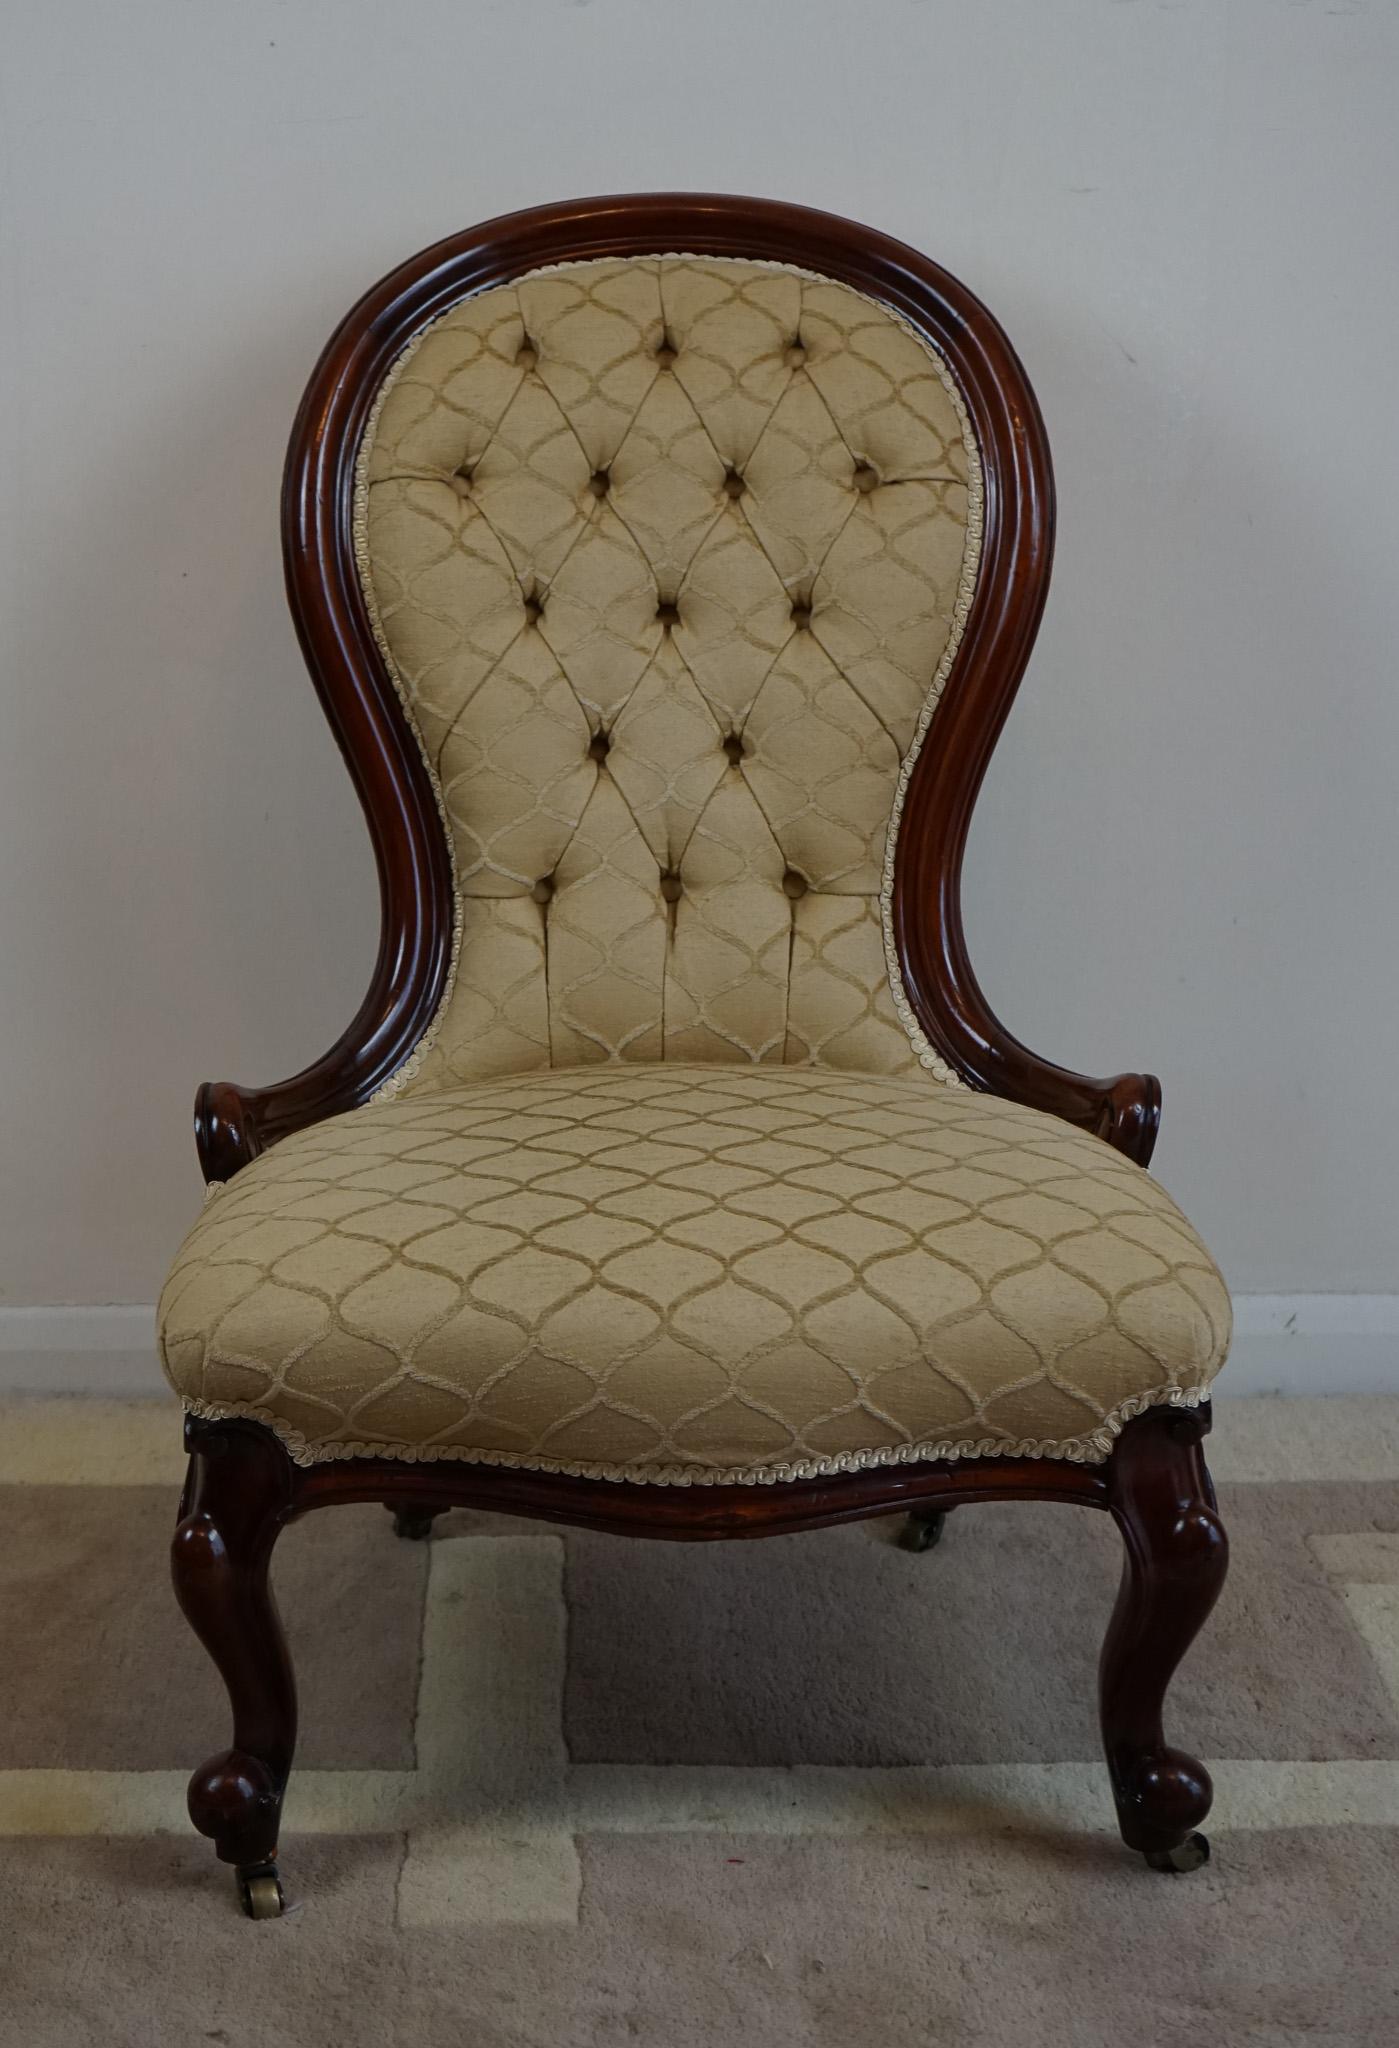 This is a classic Victorian, antique salon lady’s chair dating to the mid 19th century, c.1840. 
Raised on stout, oblique cabriole legs
Featuring bulbous knee and scrolled toe
Swept and shaped rear legs
Serpentine front seat rail
Dished and